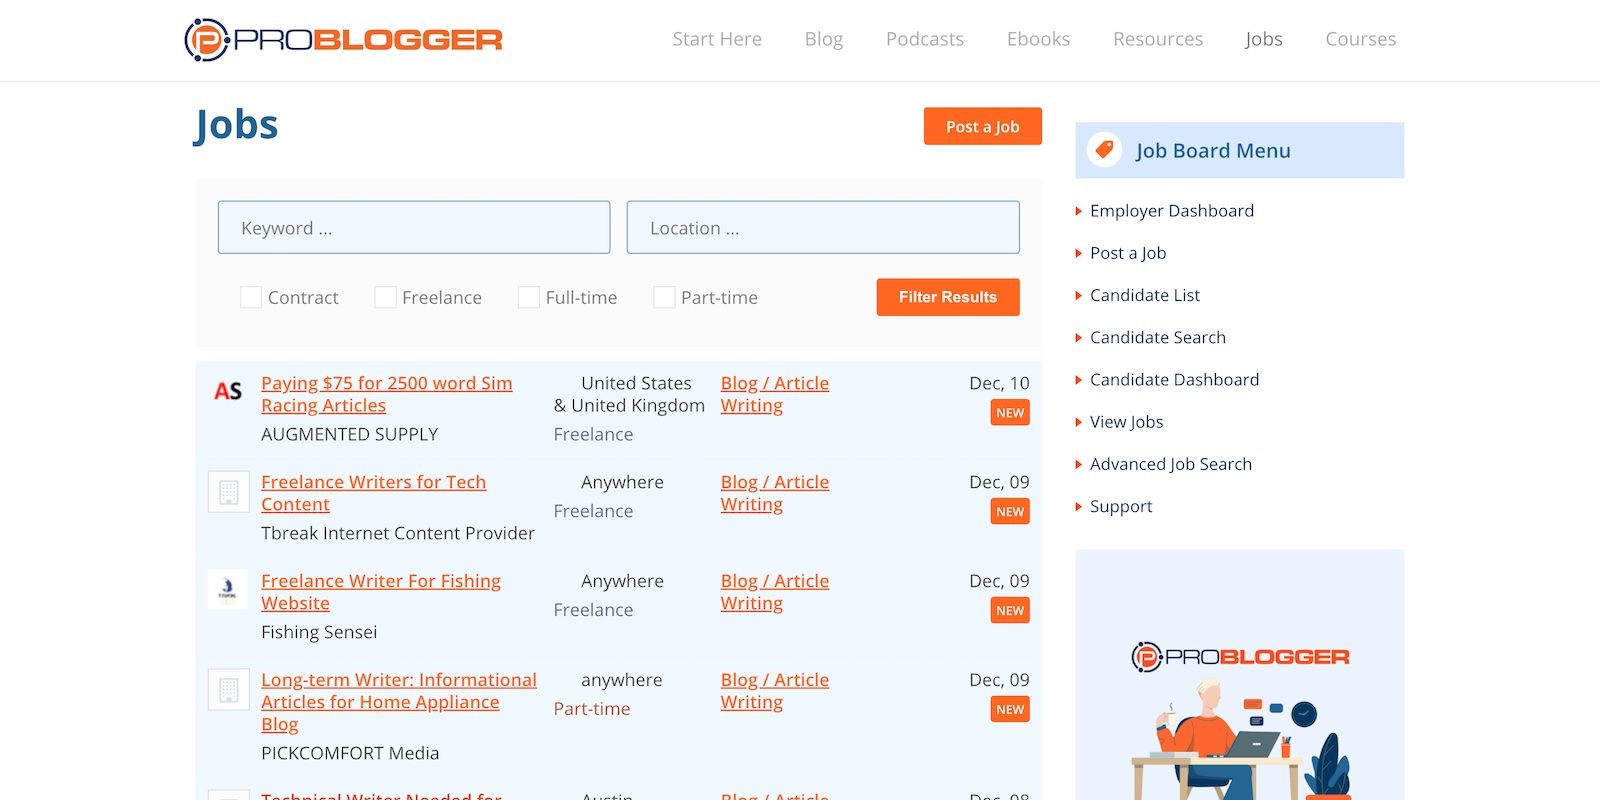 The ProBlogger job board for writing gigs